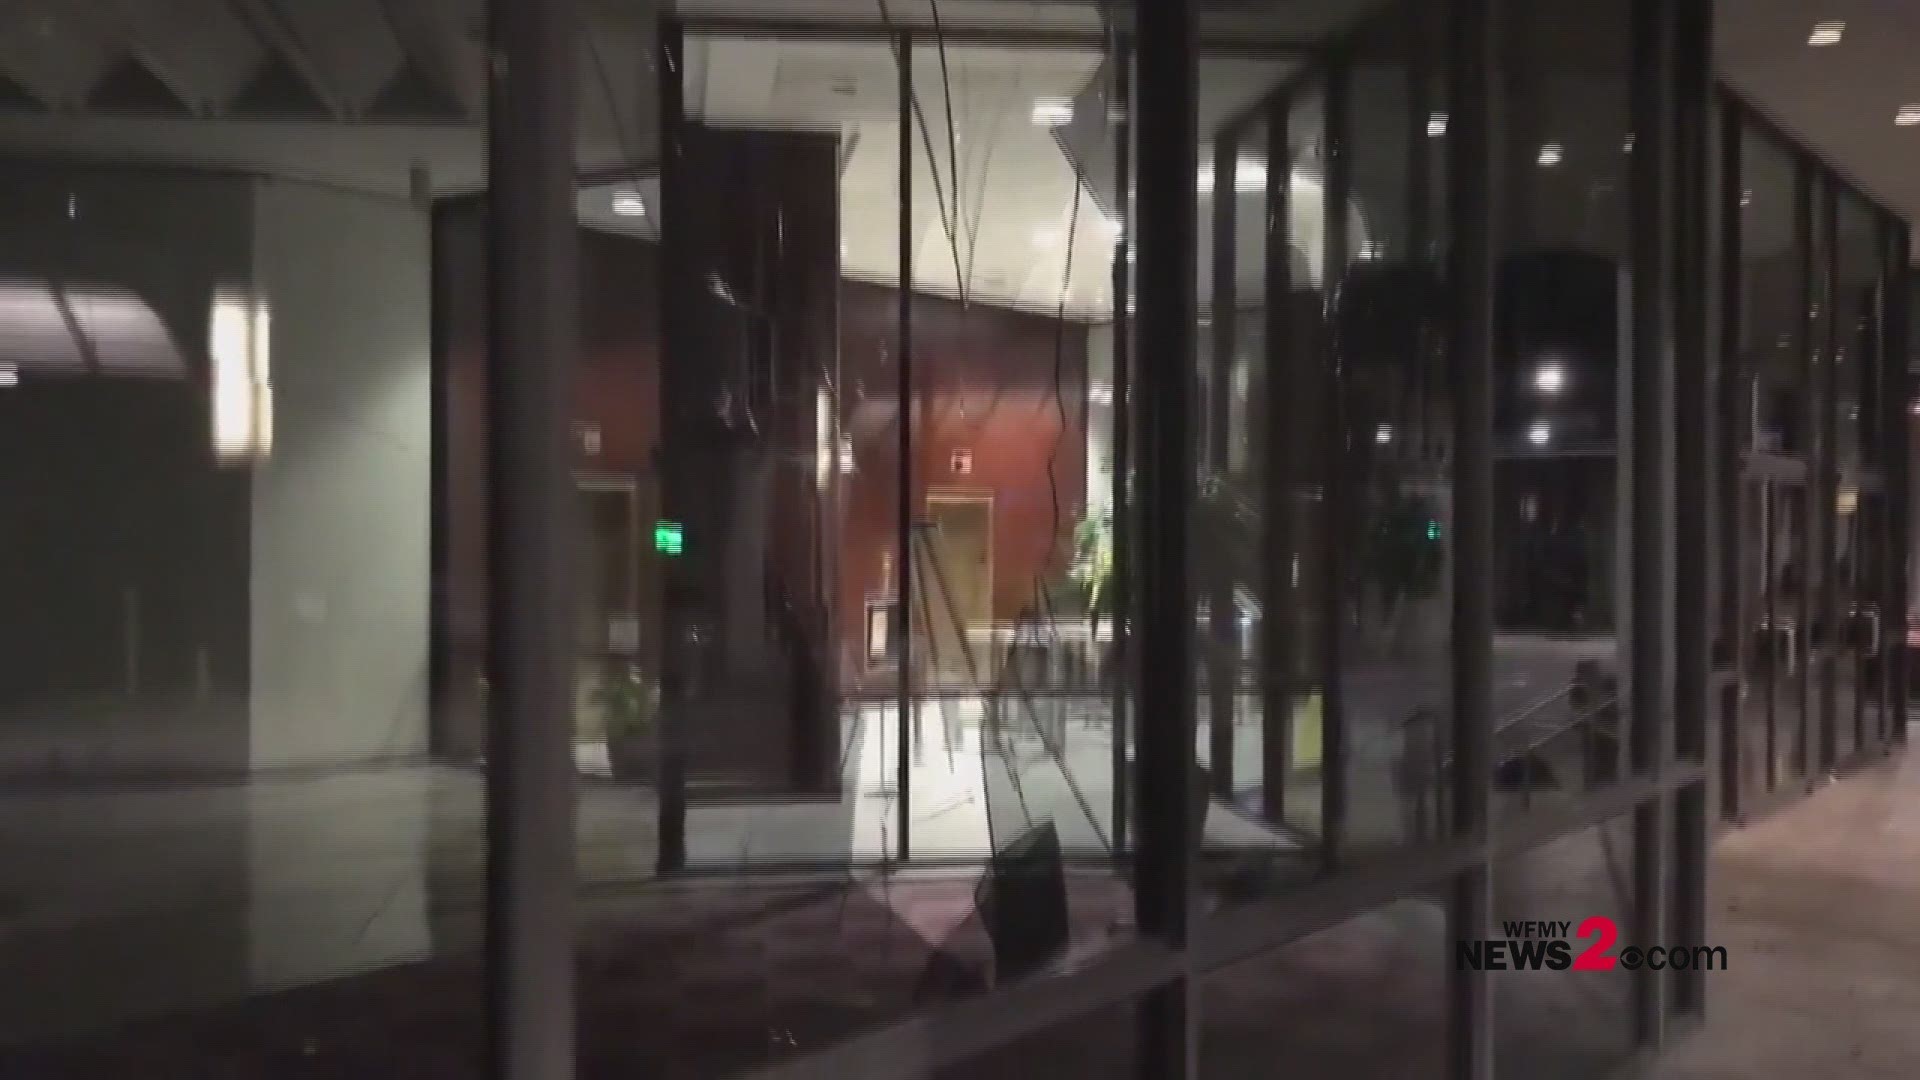 Windows were broken at downtown Greensboro's tallest building during the second night of George Floyd demonstrations. It happened after peaceful protests were done.